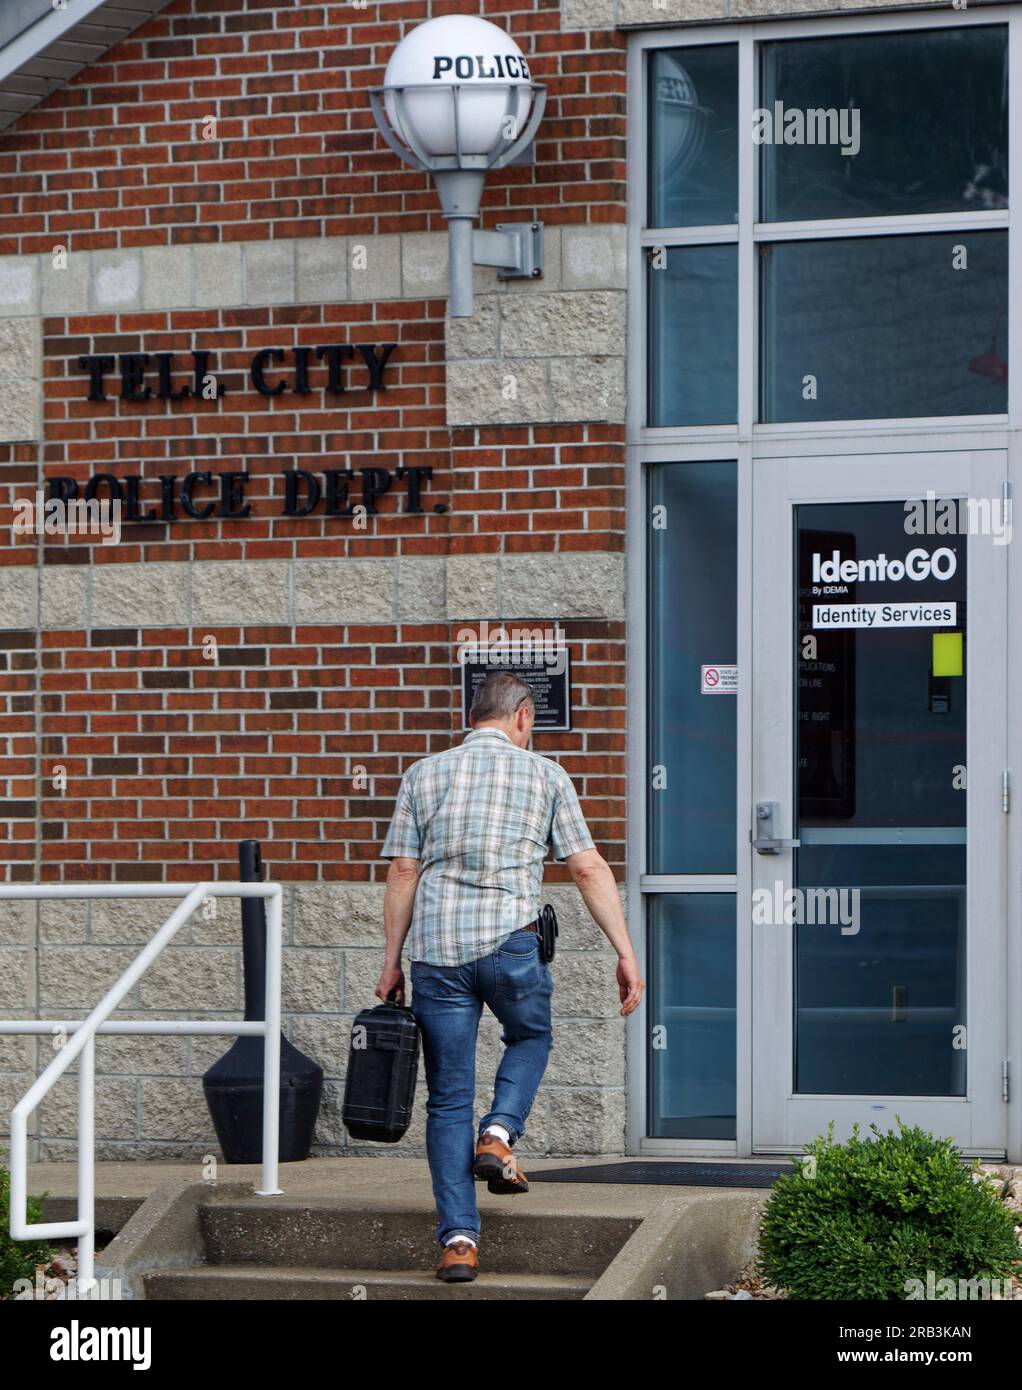 An unidentified man walks into the Tell City Police Department carrying a hard-sided equipment case on Thursday, July 6, 2023 in Tell City, Troy Township, Perry County, IN, USA. Glenn, 47, was shot and killed July 3 while trying to arrest a domestic violence suspect at a local hospital, becoming the first line-of-duty death in the Tell City Police Department's nearly 165-year history and second Indiana police officer to be killed in the line of duty in less than a week. (Apex MediaWire Photo by Billy Suratt) Stock Photo